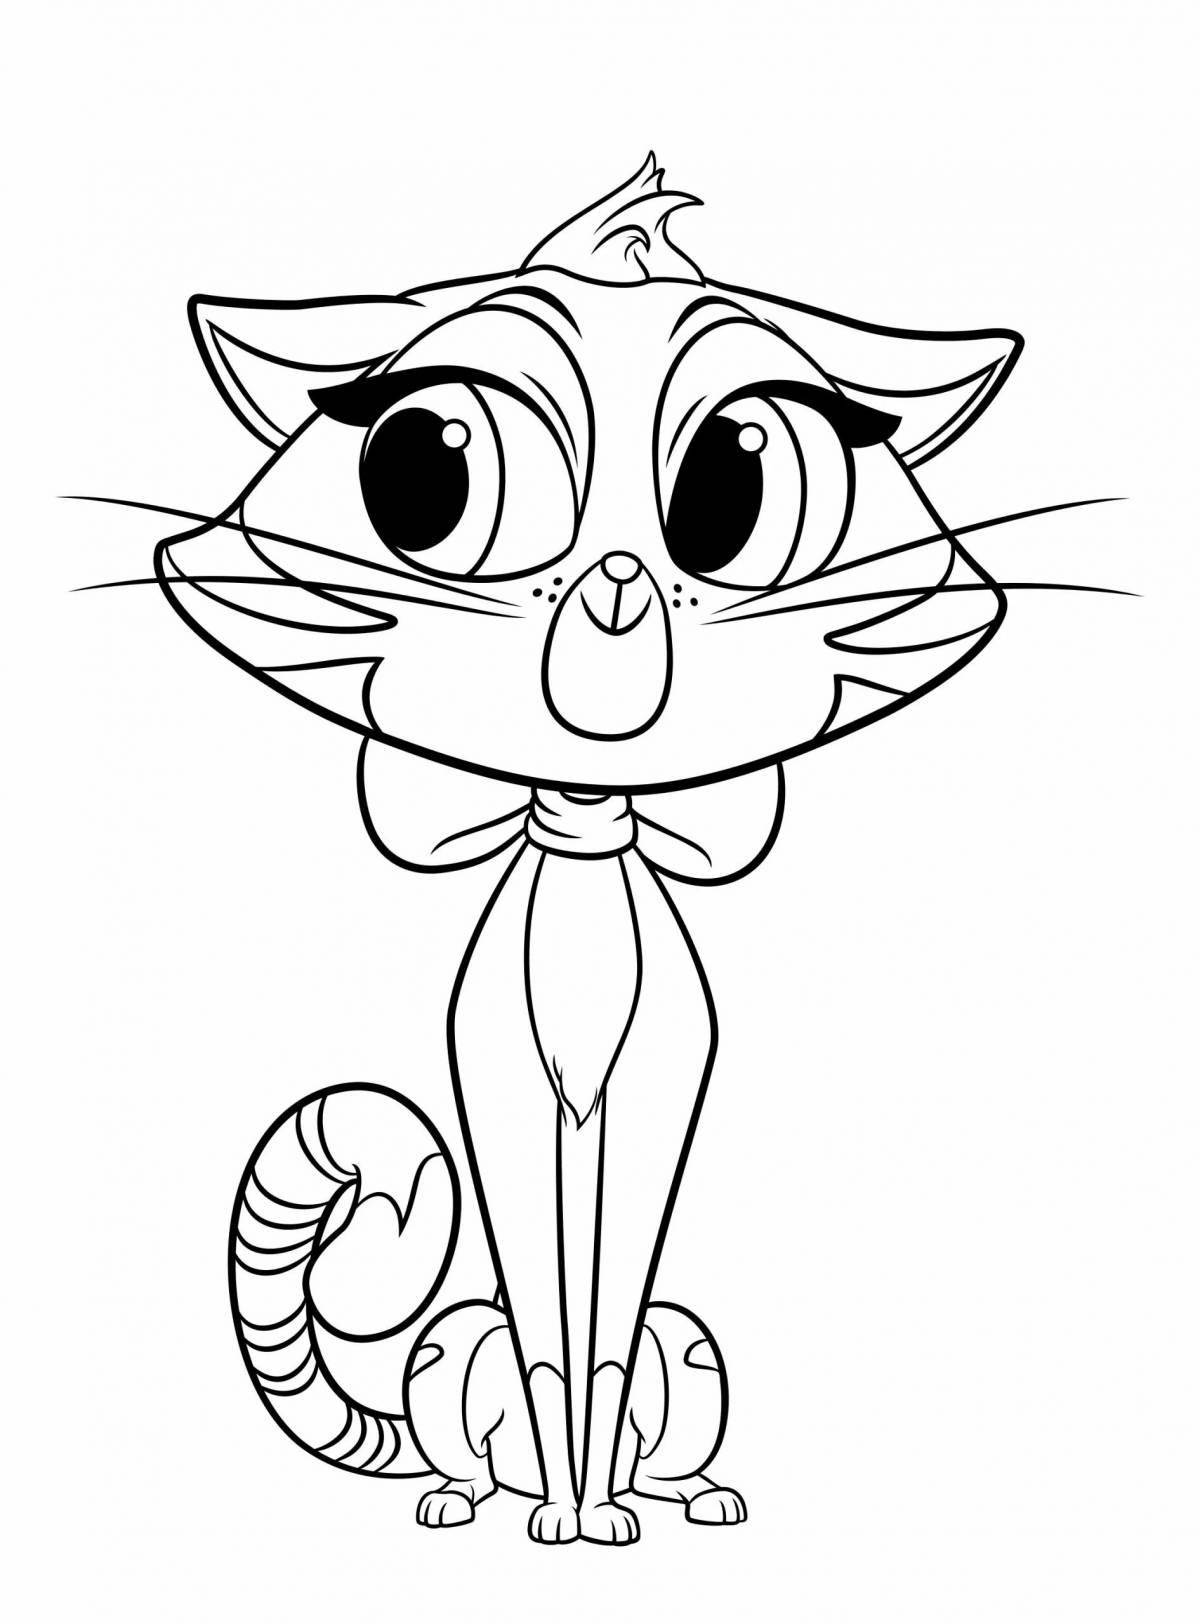 Smiling cat cartoon coloring pages